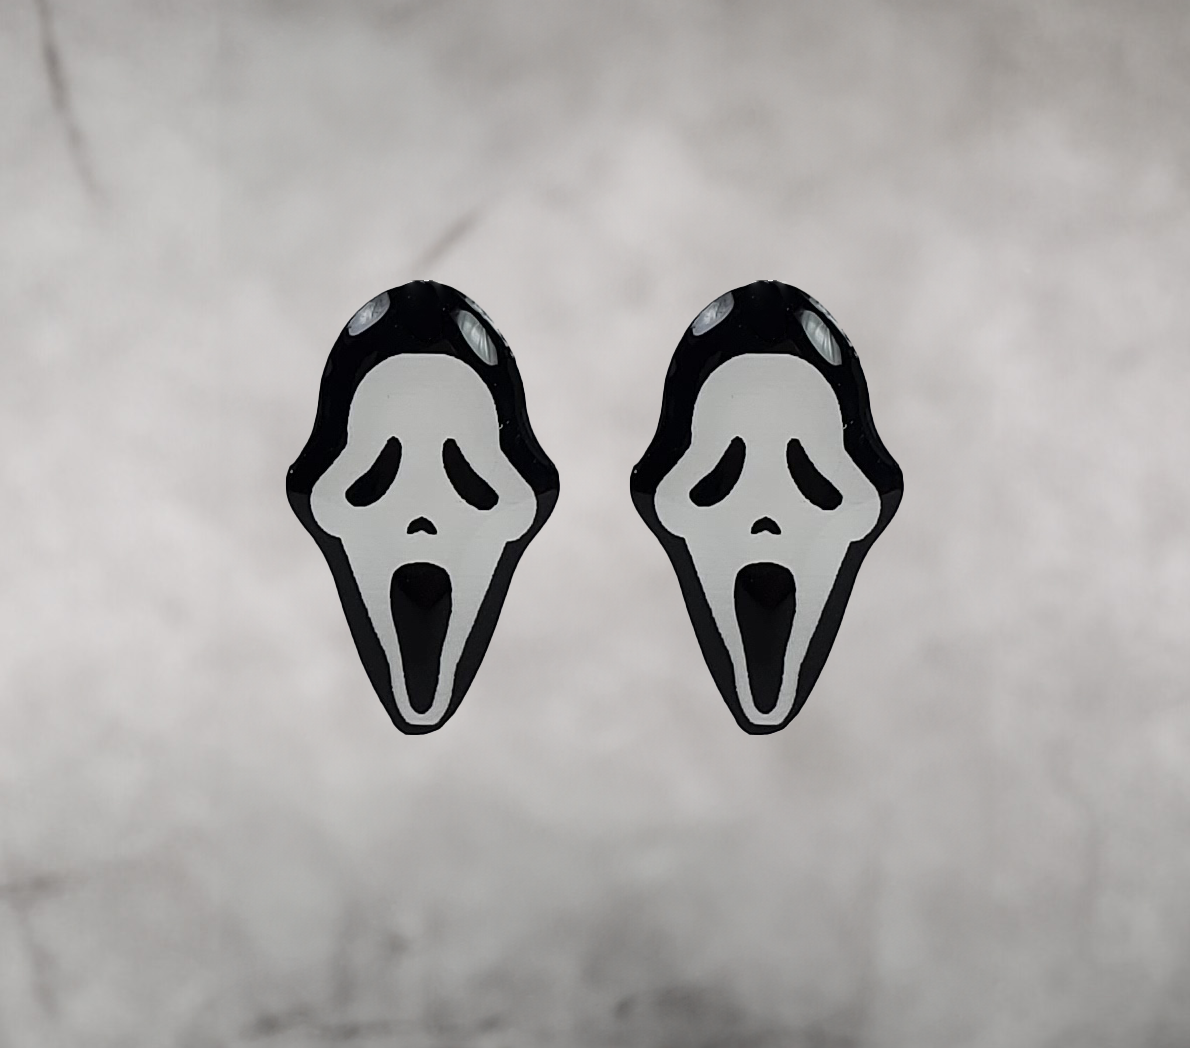 GhostFace Studs earrings from the movie scream